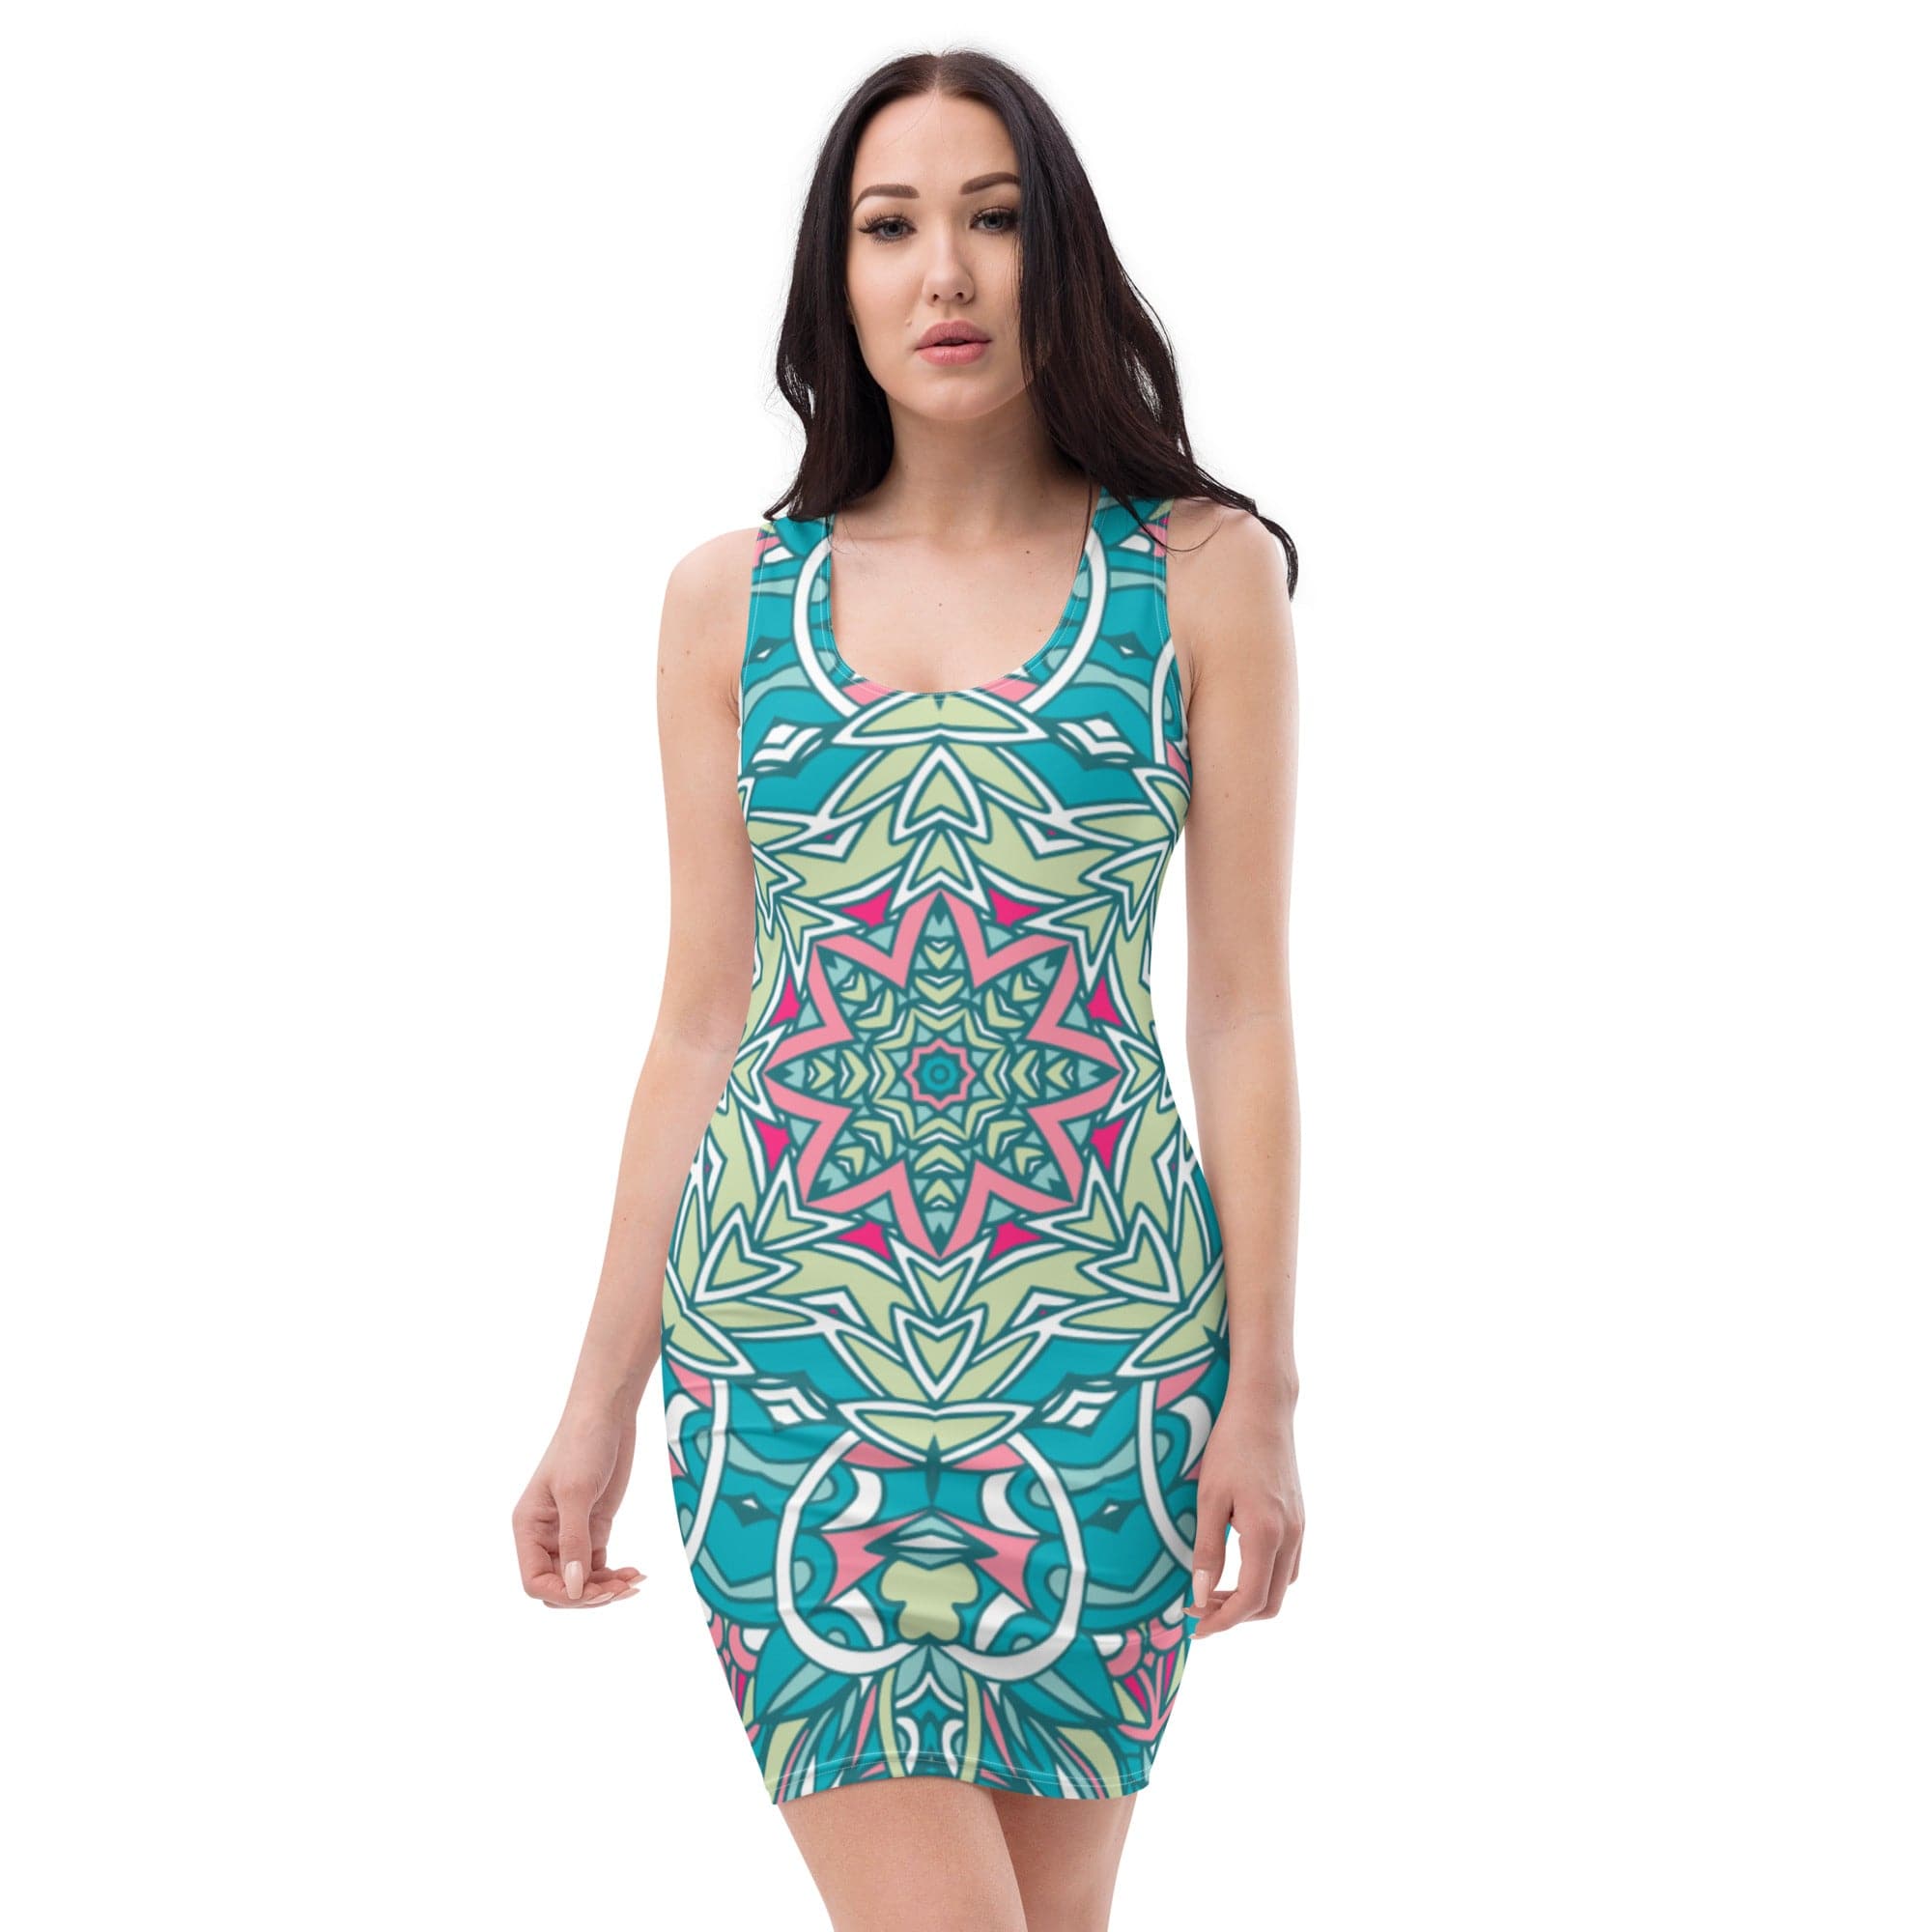 Fabulous Blueish Green Fantasy Printed Short  Microfiber Fitted Summer Dress